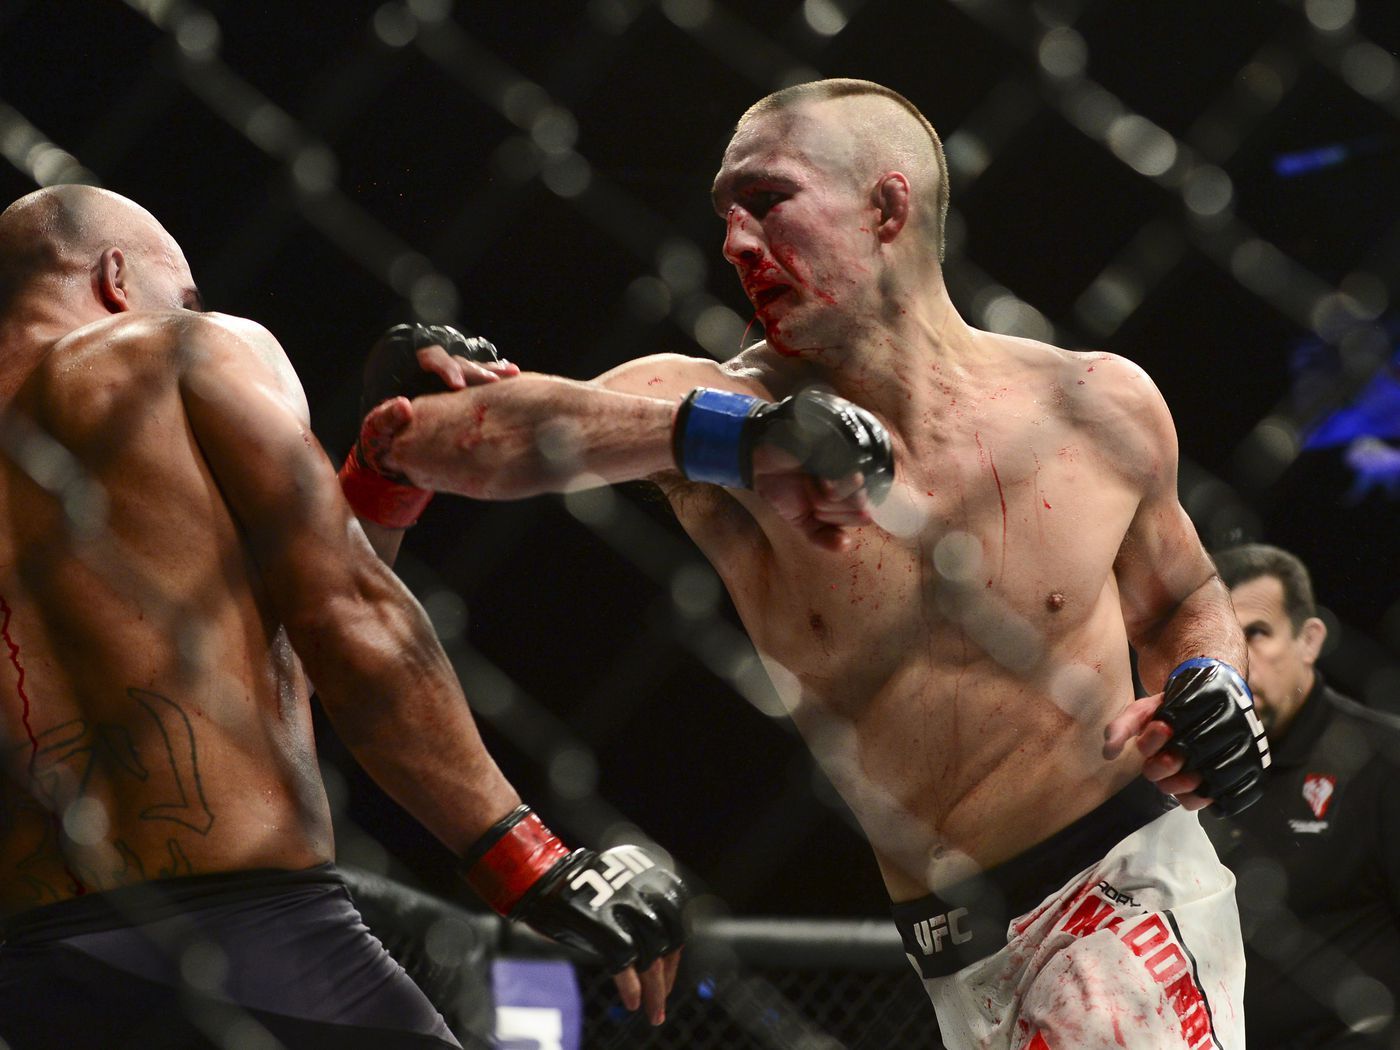 Photos: Rory MacDonald and Robbie Lawler's faces, a day after UFC 189 war